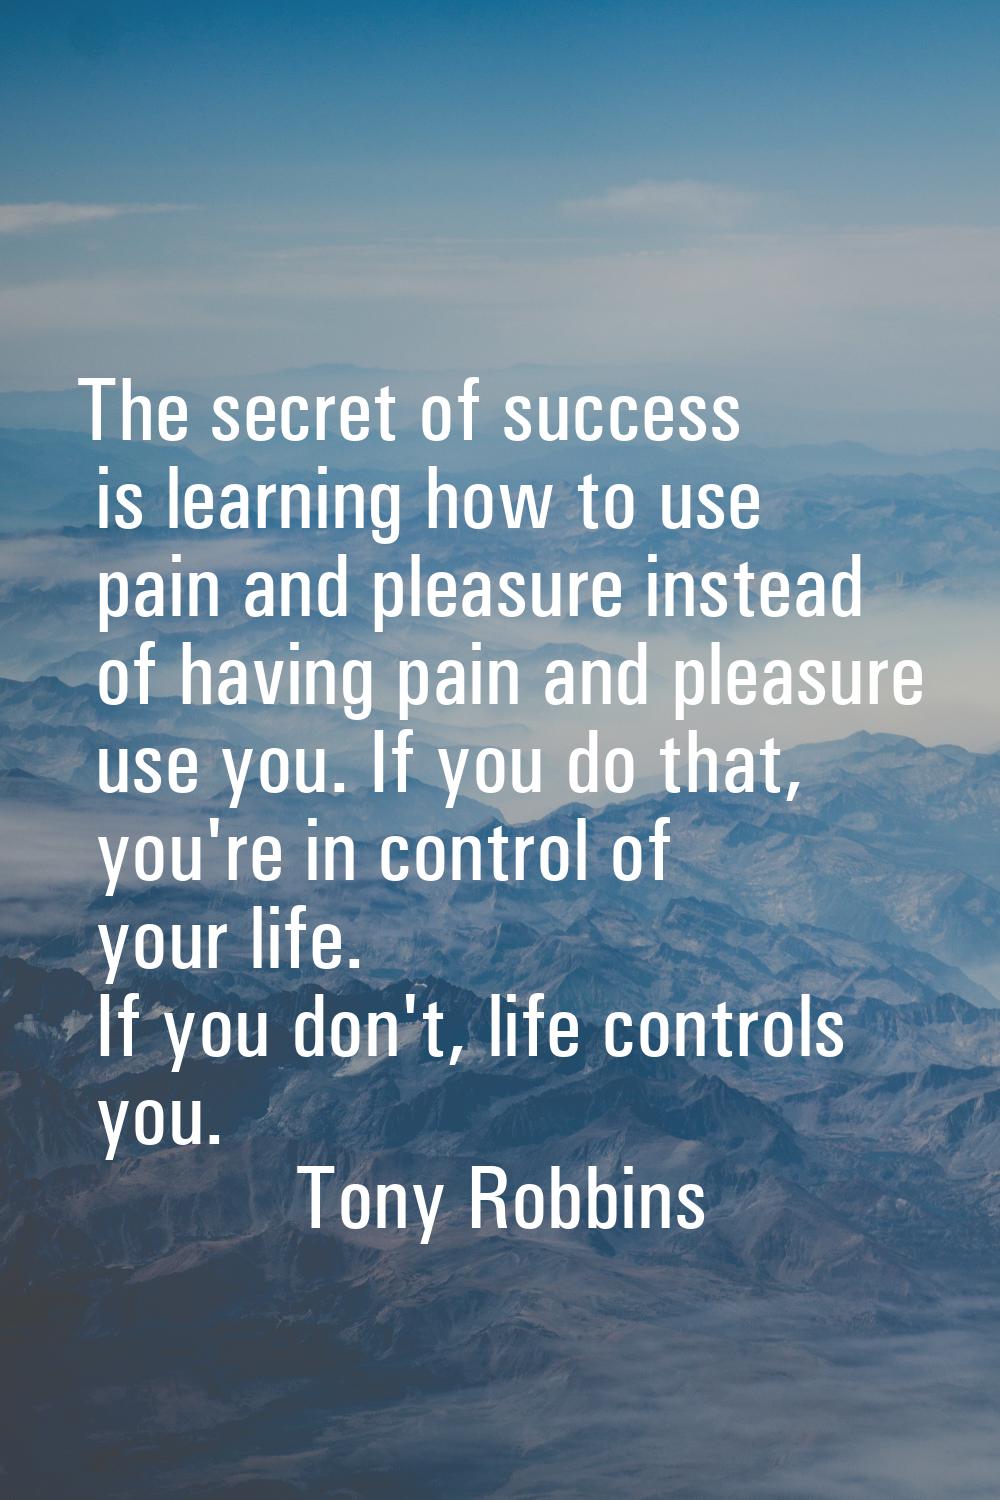 The secret of success is learning how to use pain and pleasure instead of having pain and pleasure 